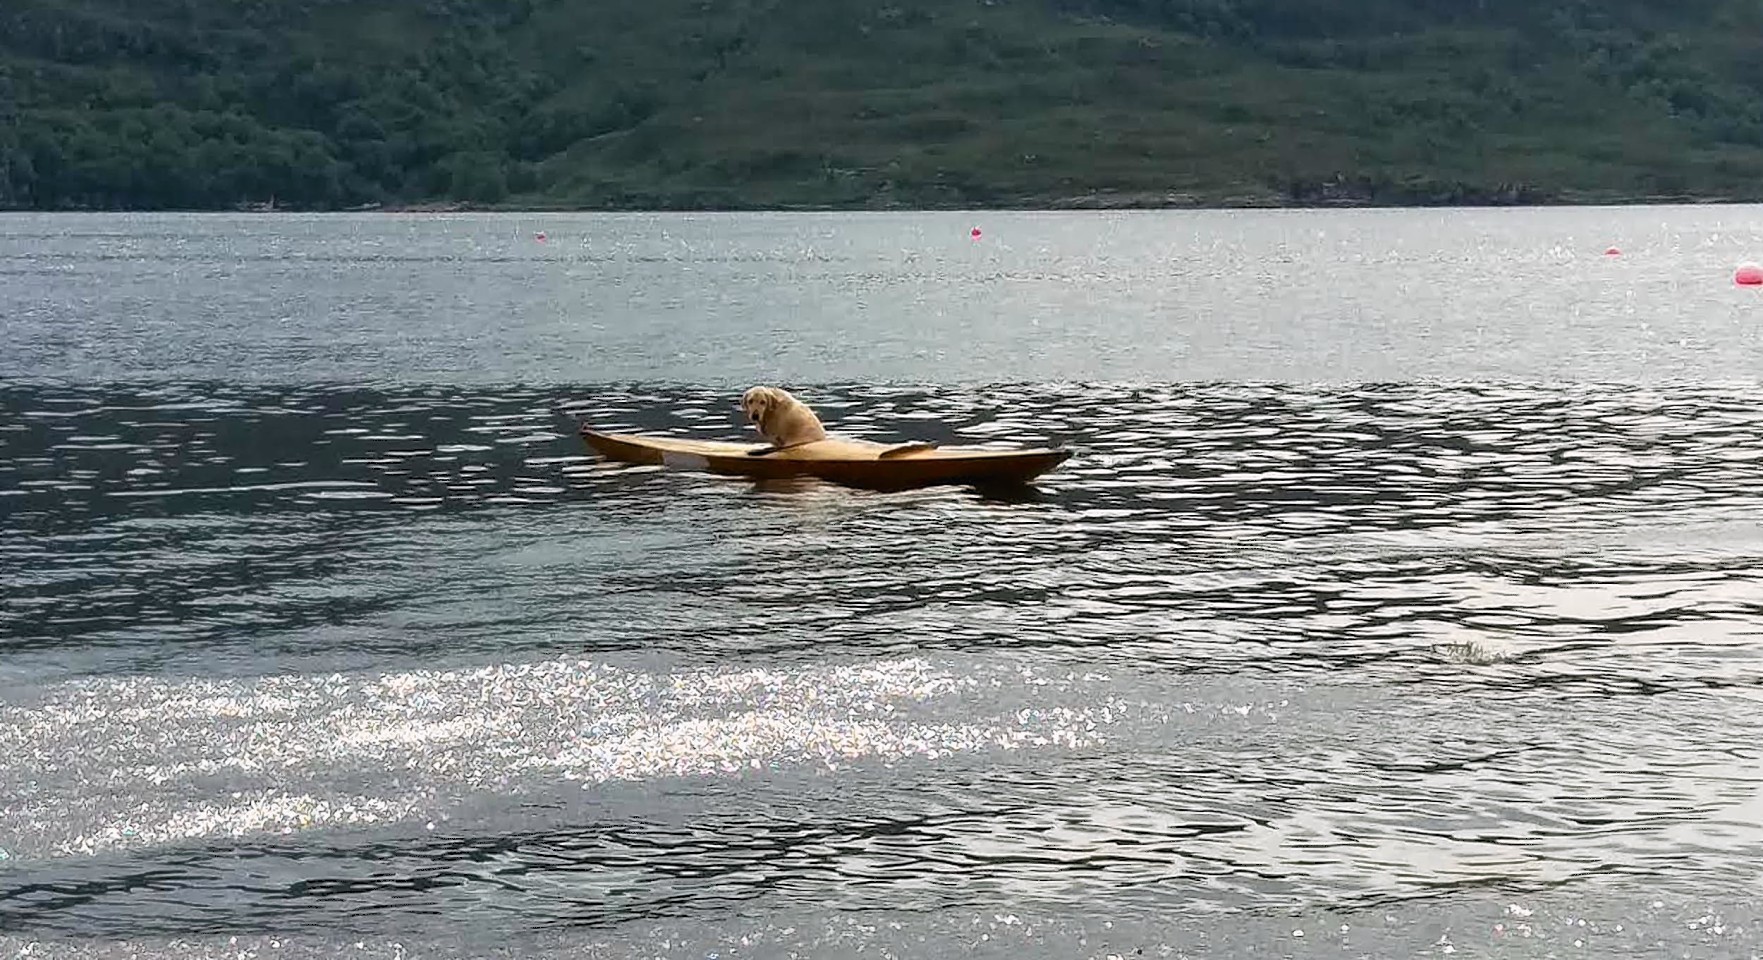 Rosie the Labrador spent half an hour in a kayak and had to be rescued by a rowing boat